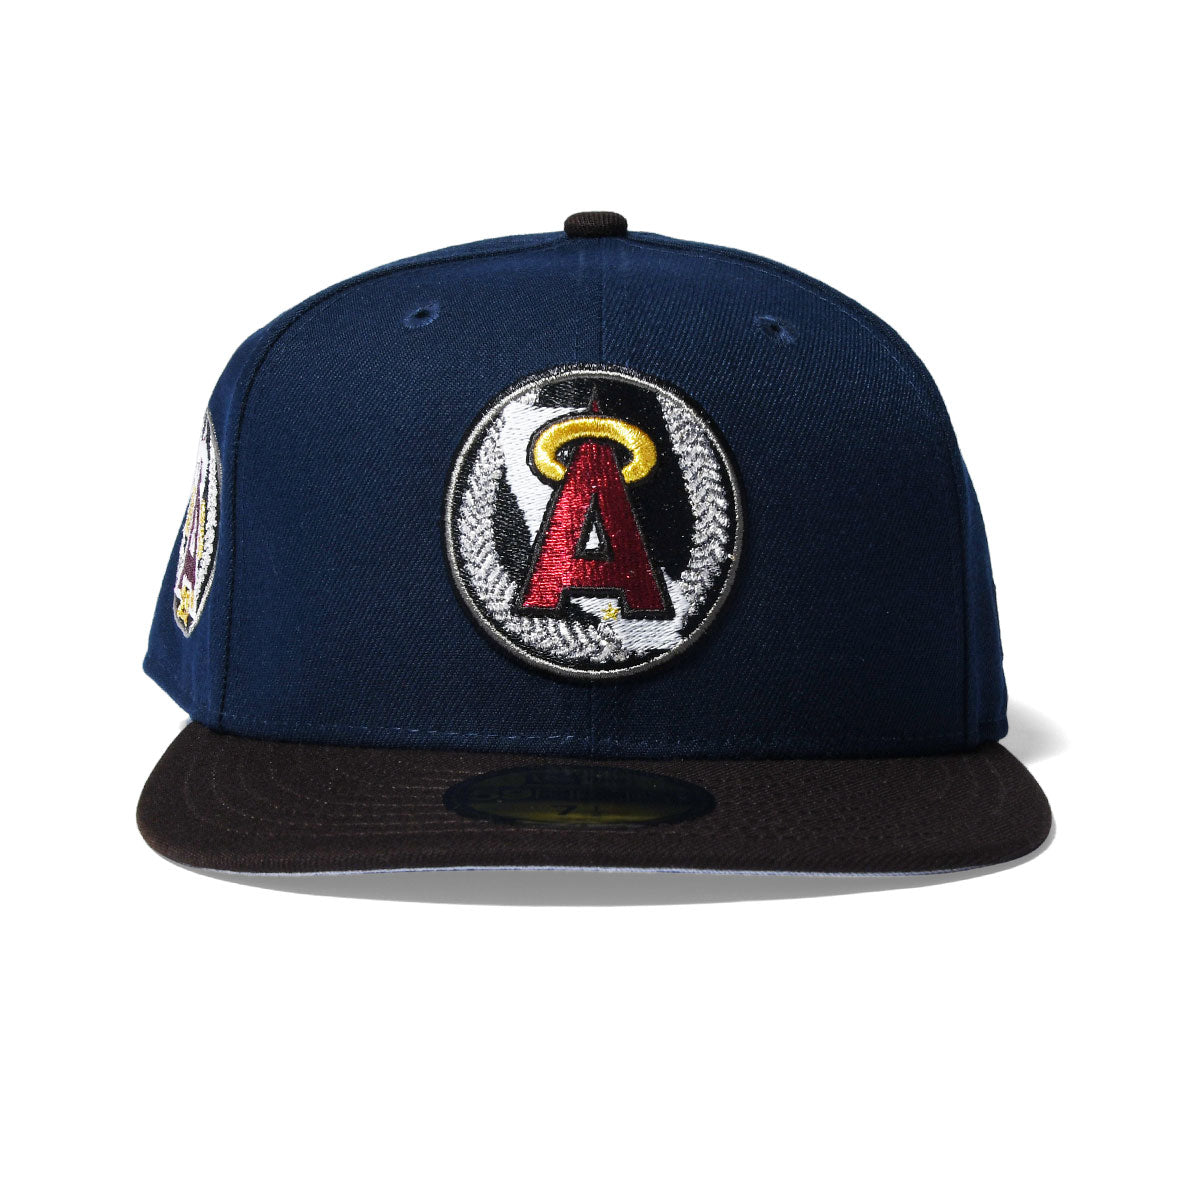 NEWERA-273 Los Angeles Angels 25TH ANNIVERSARY 59FIFTY